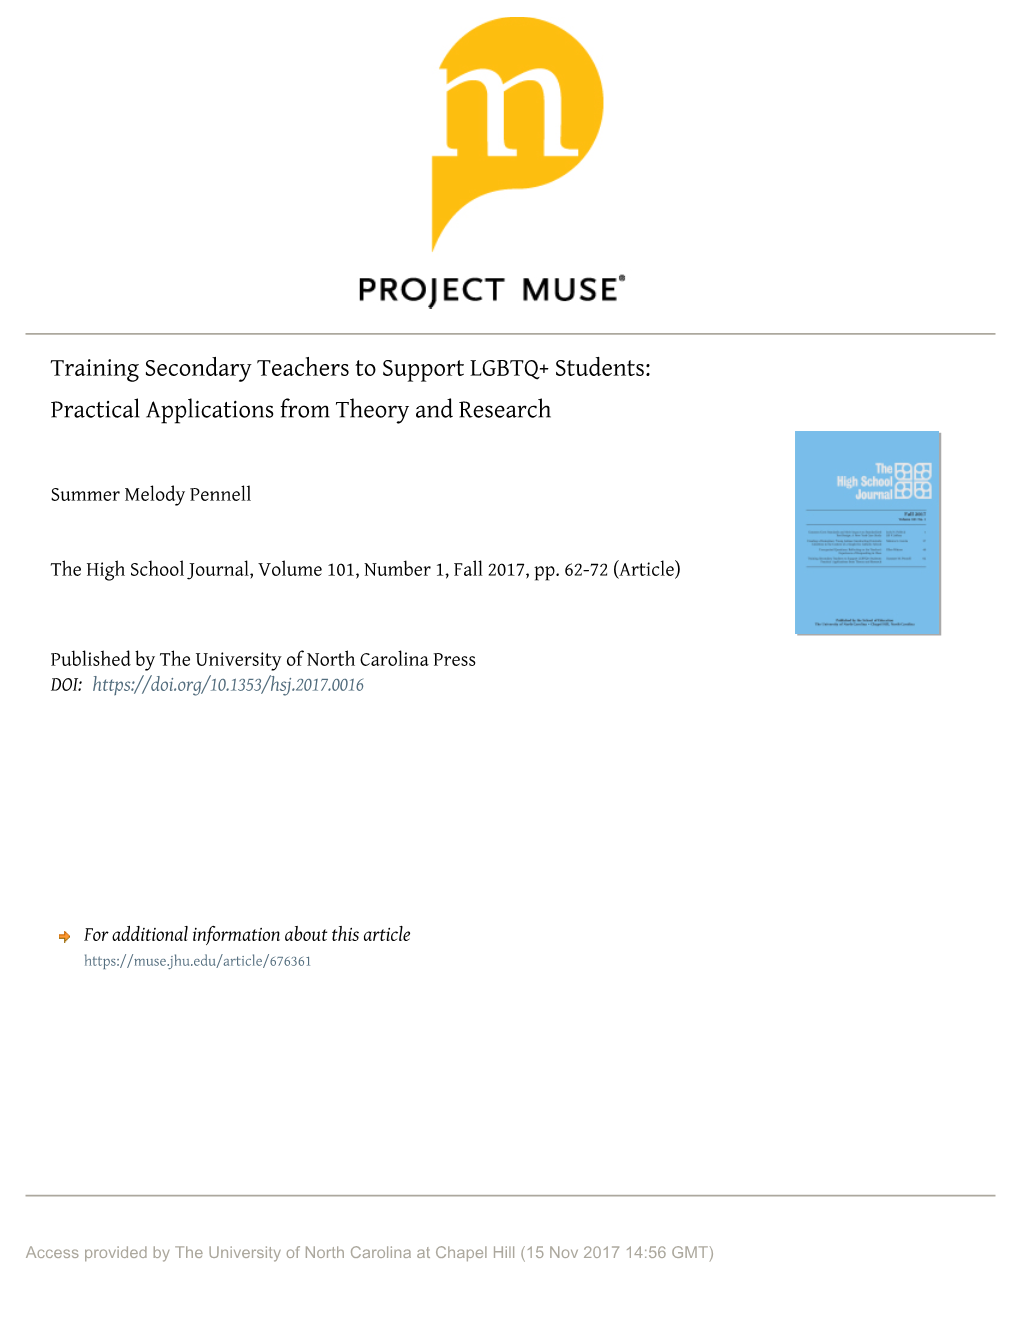 Training Secondary Teachers to Support LGBTQ+ Students: Practical Applications from Theory and Research